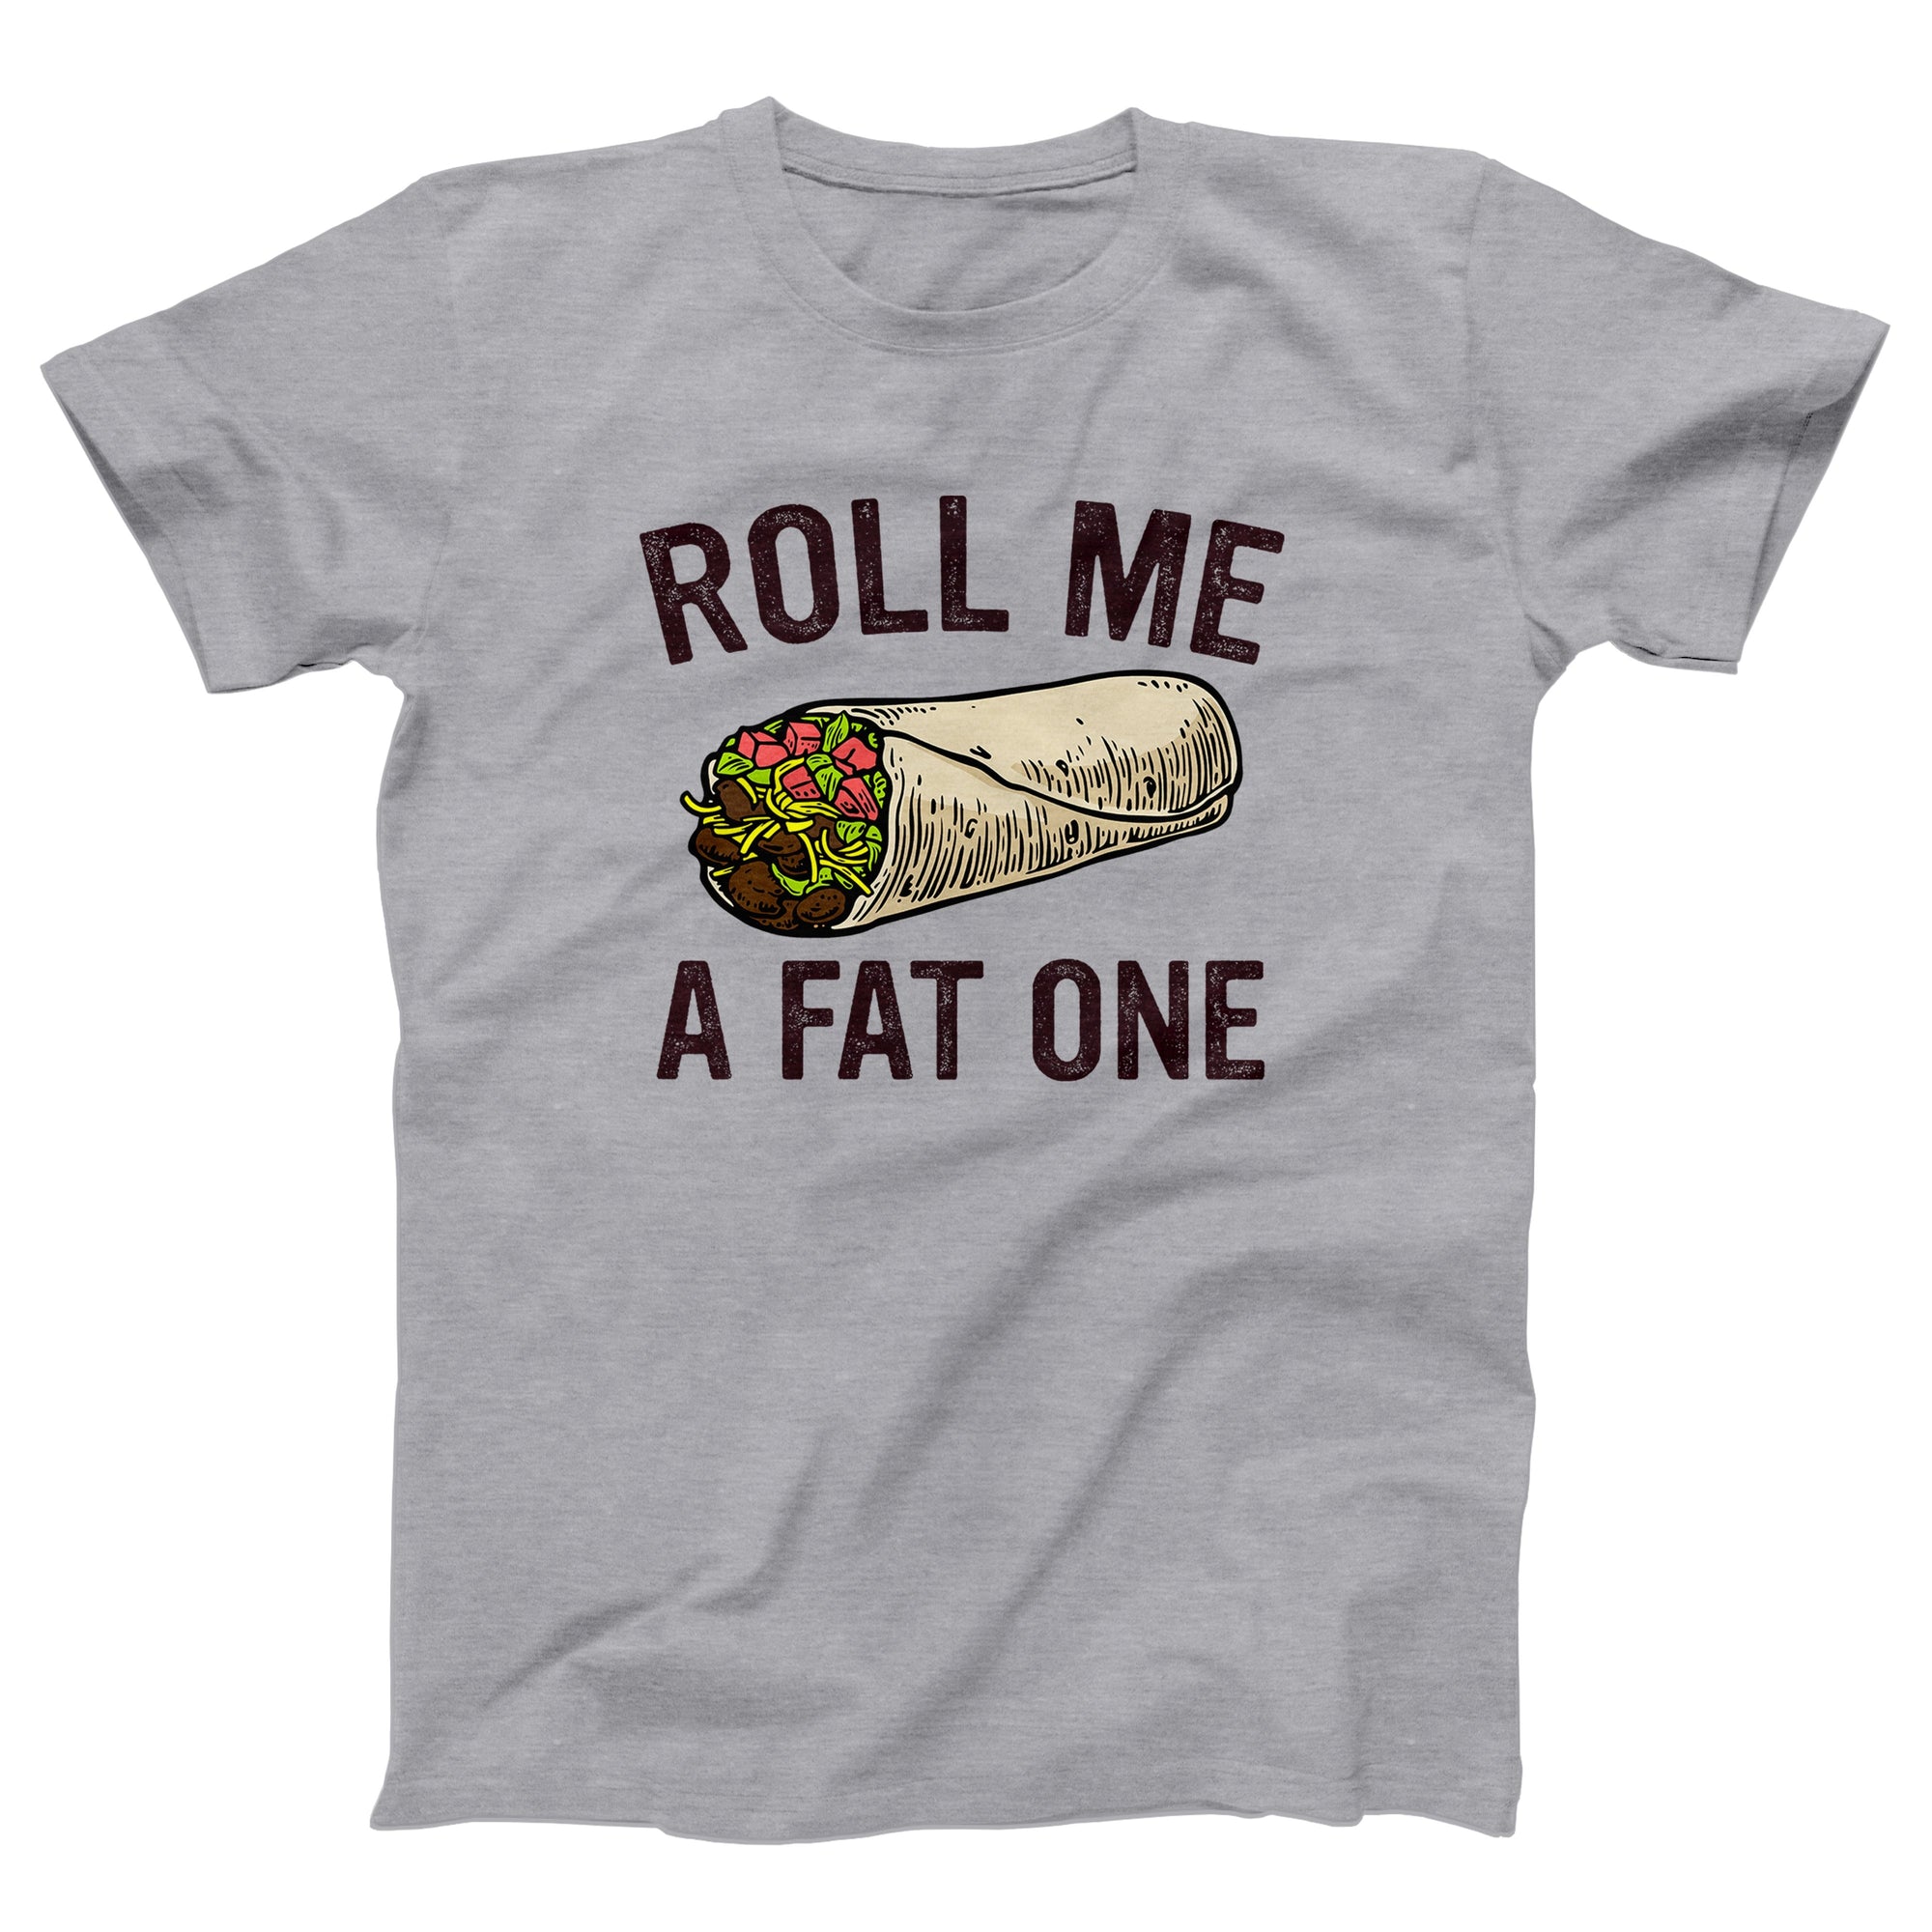 Roll Me A Fat One Adult Unisex T-Shirt